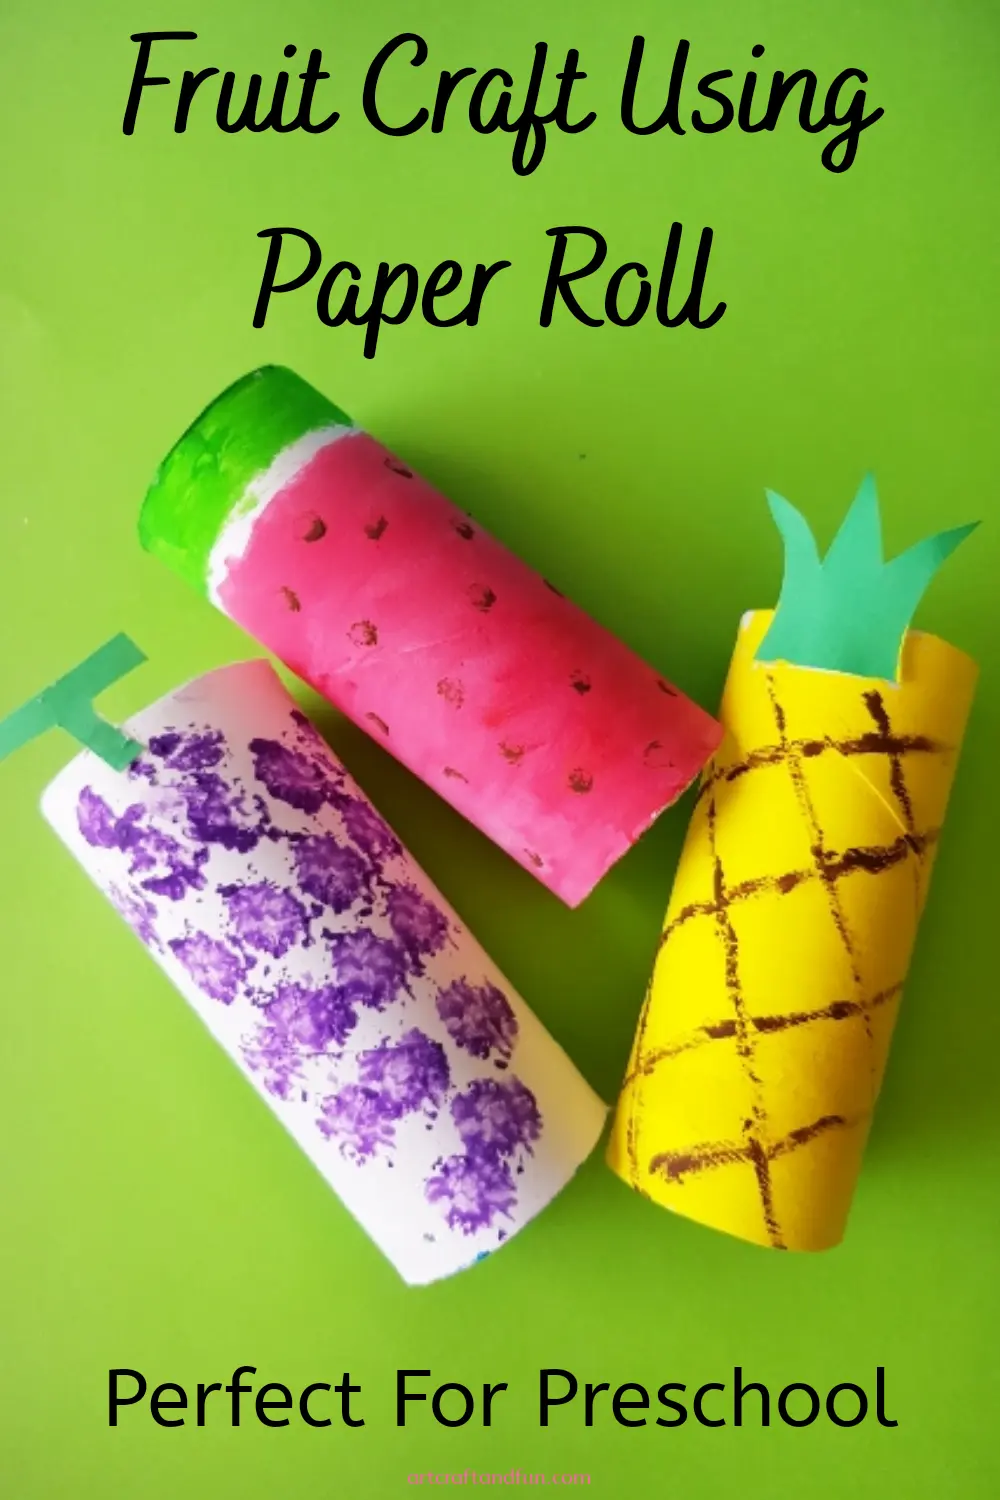 Fruit Craft Using Paper Roll